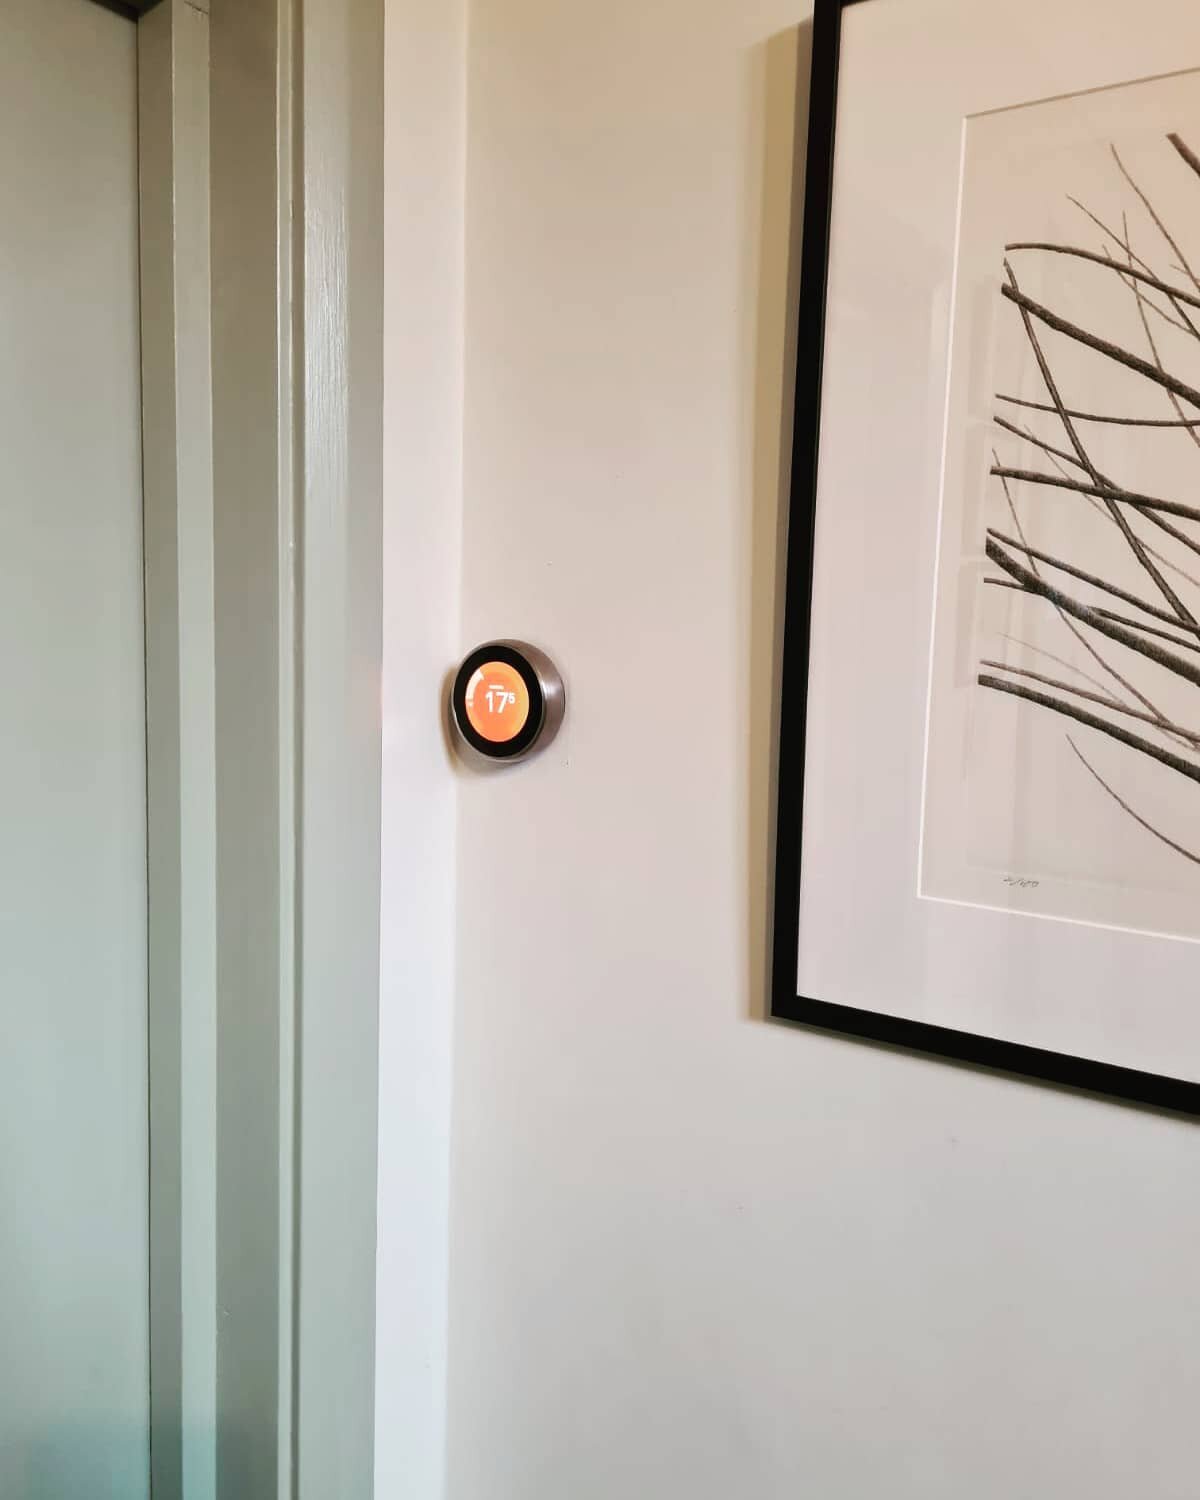 Another day another load of Nest Thermostat Installations! 
@googlenest 
#nestpro #googlenestinstallations #electricalcontractors #electrician #smarthomes #smartthermostat #heatingcontrols #niceicapprovedcontractor #sparkylife #googlenestthermostat #